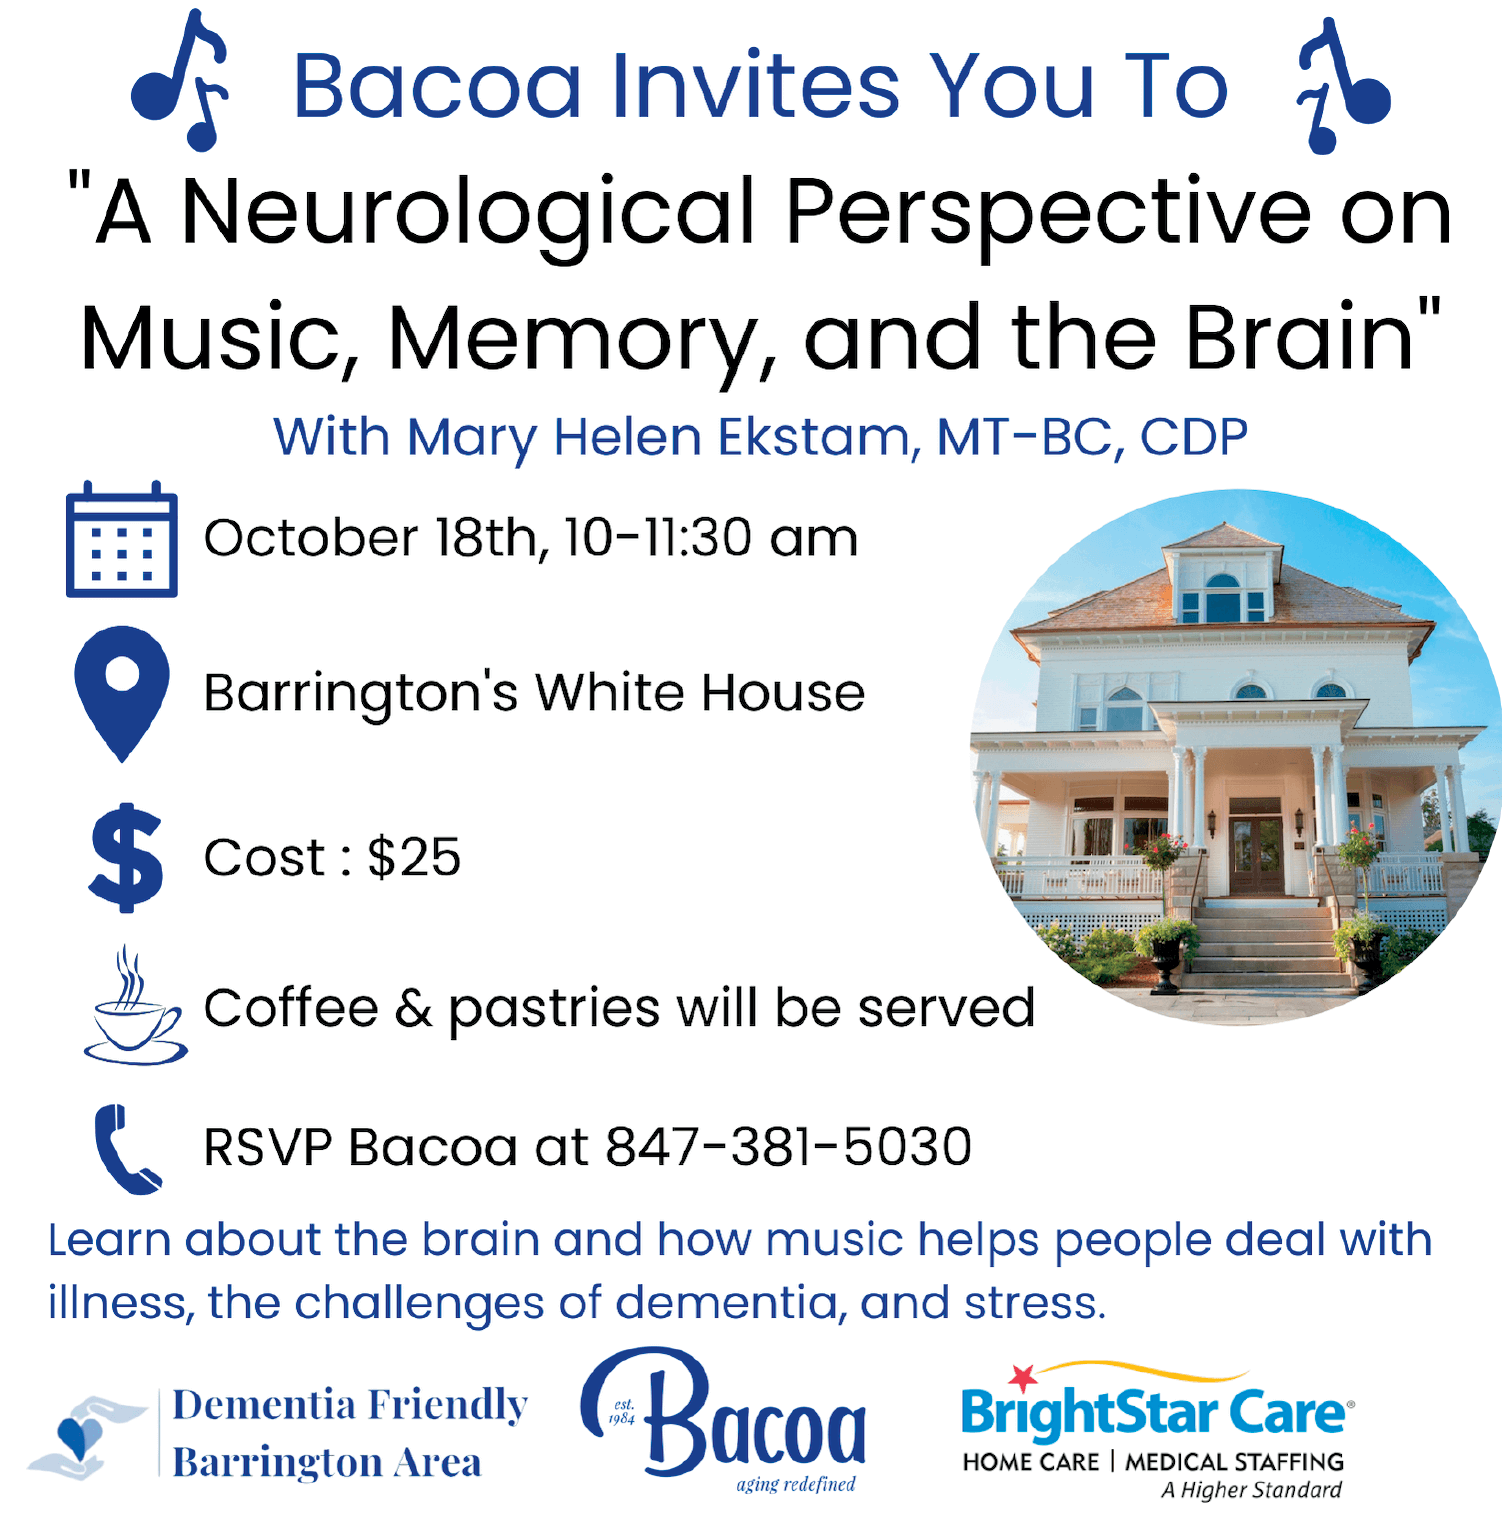 Bacoa "A Neurological Perspective on Music, Memory, and the Brain" Invitation